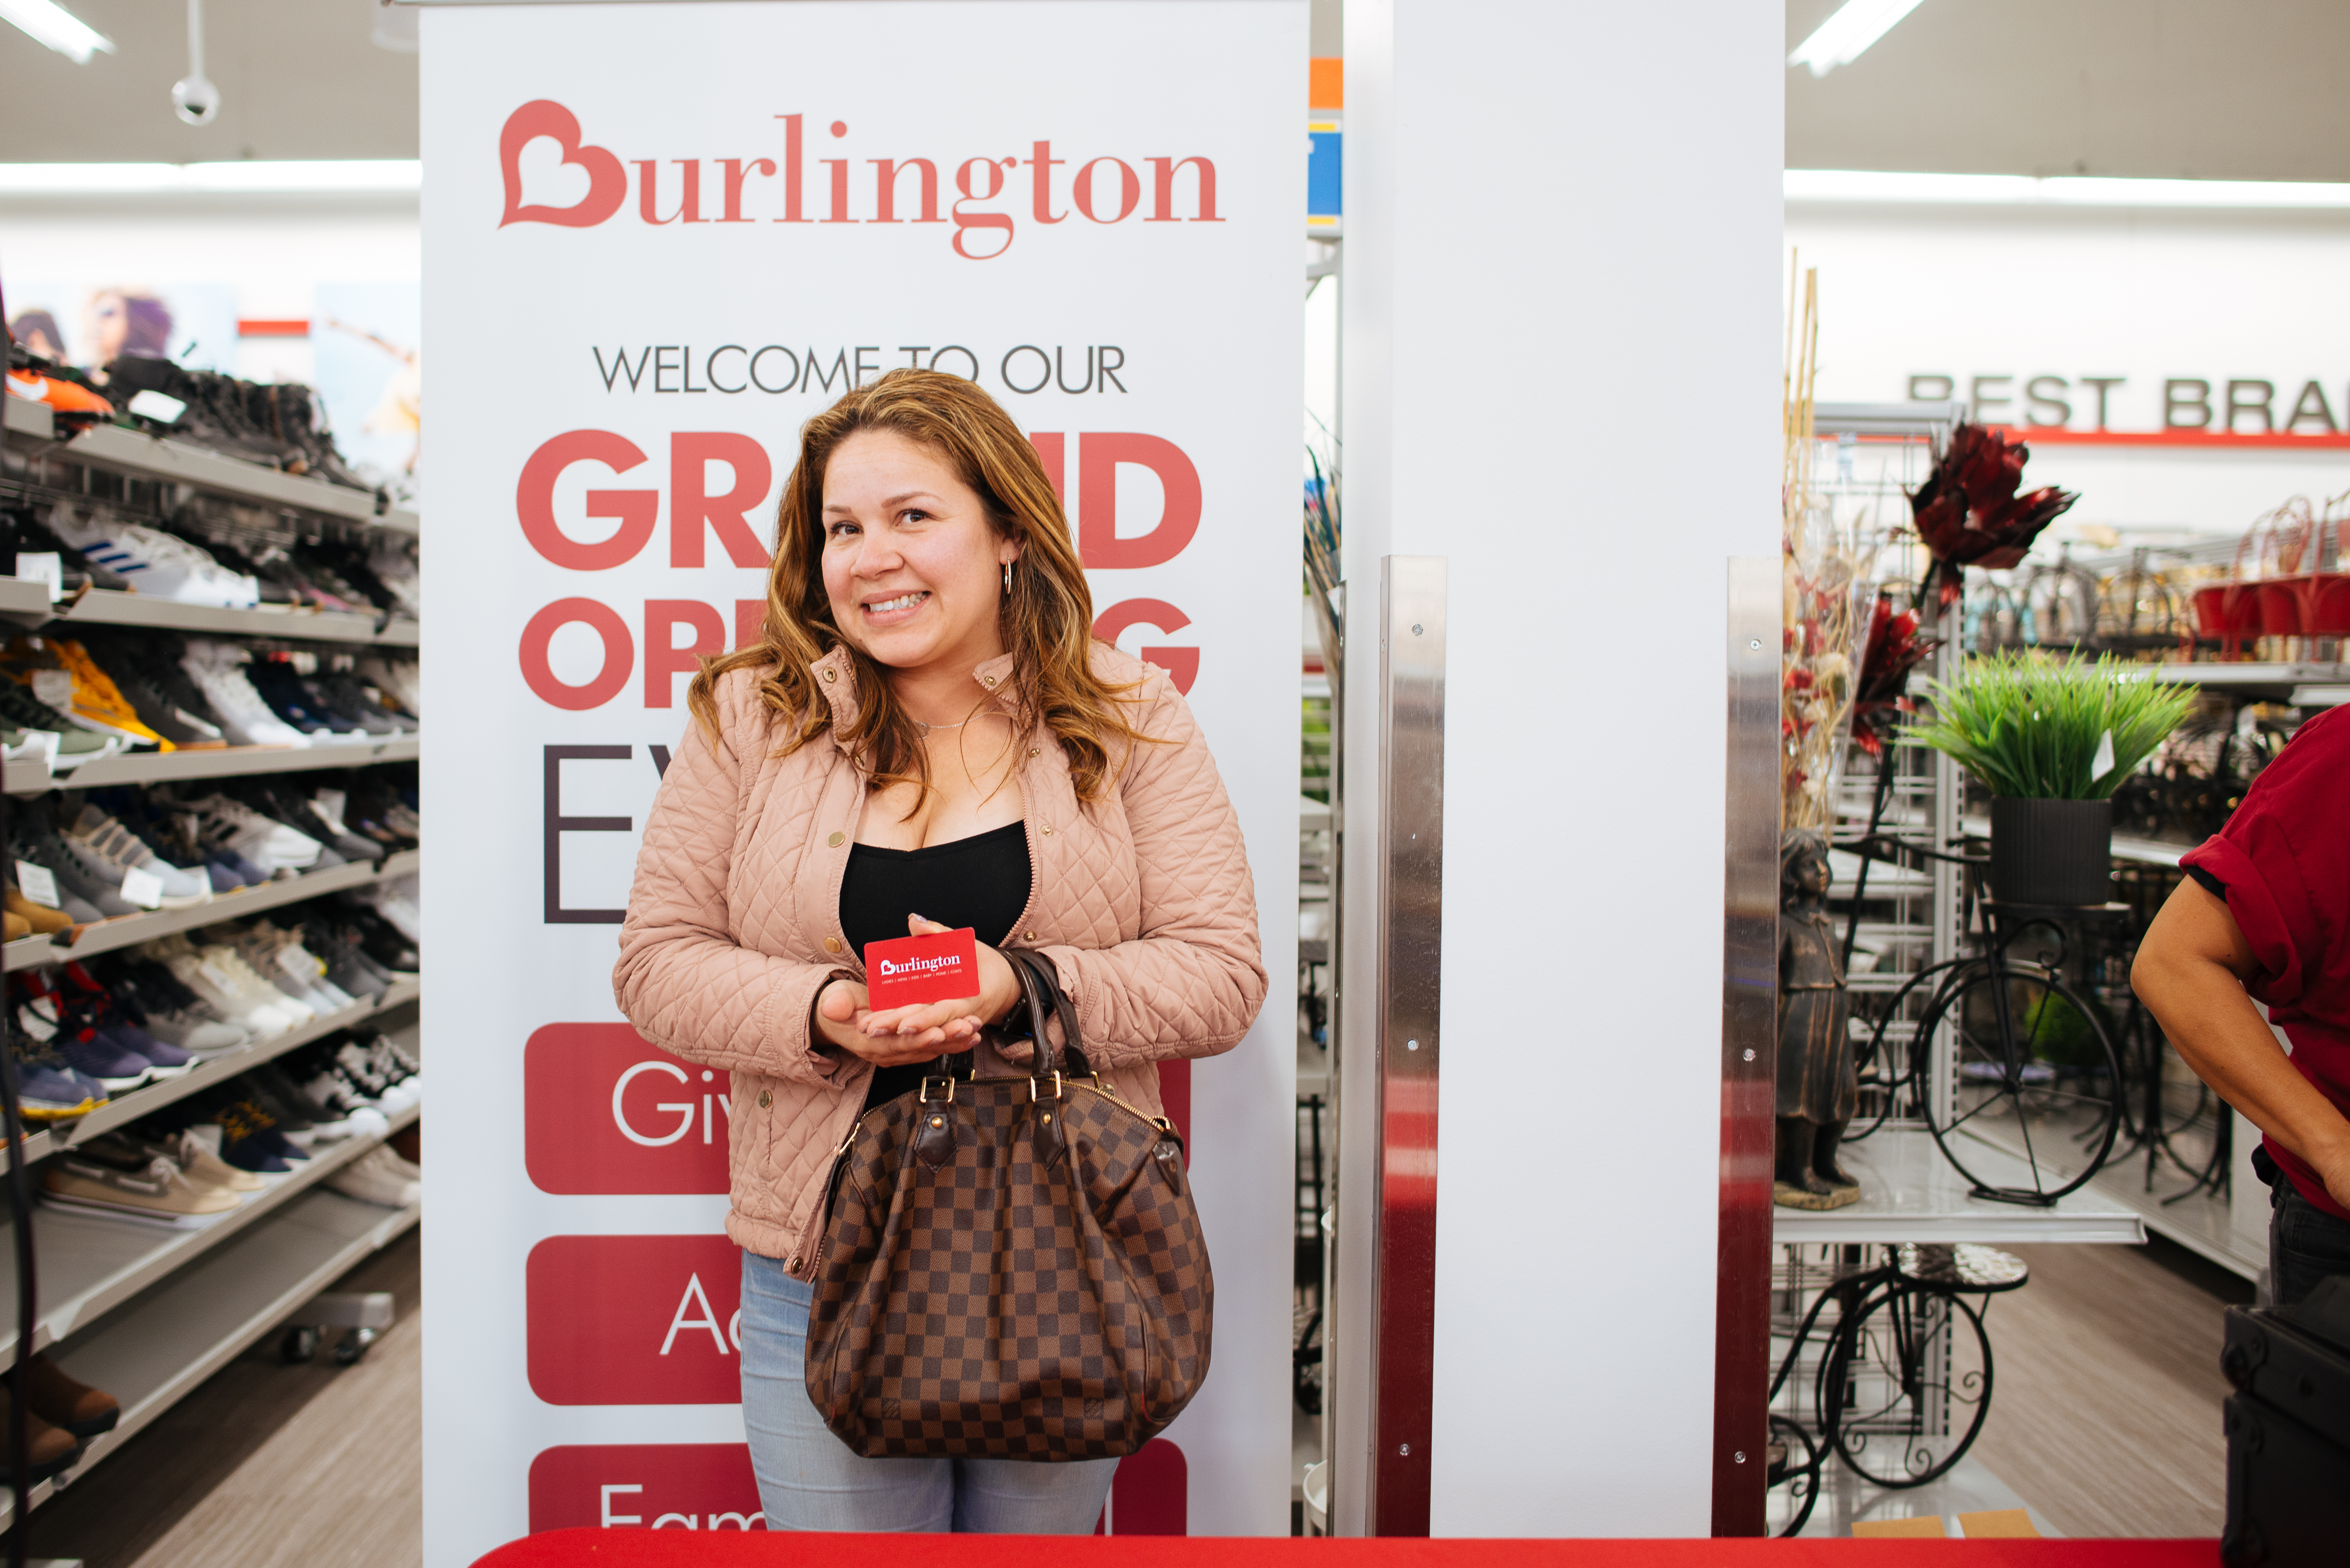 Woman smiling because she won a gift card for Burlington.